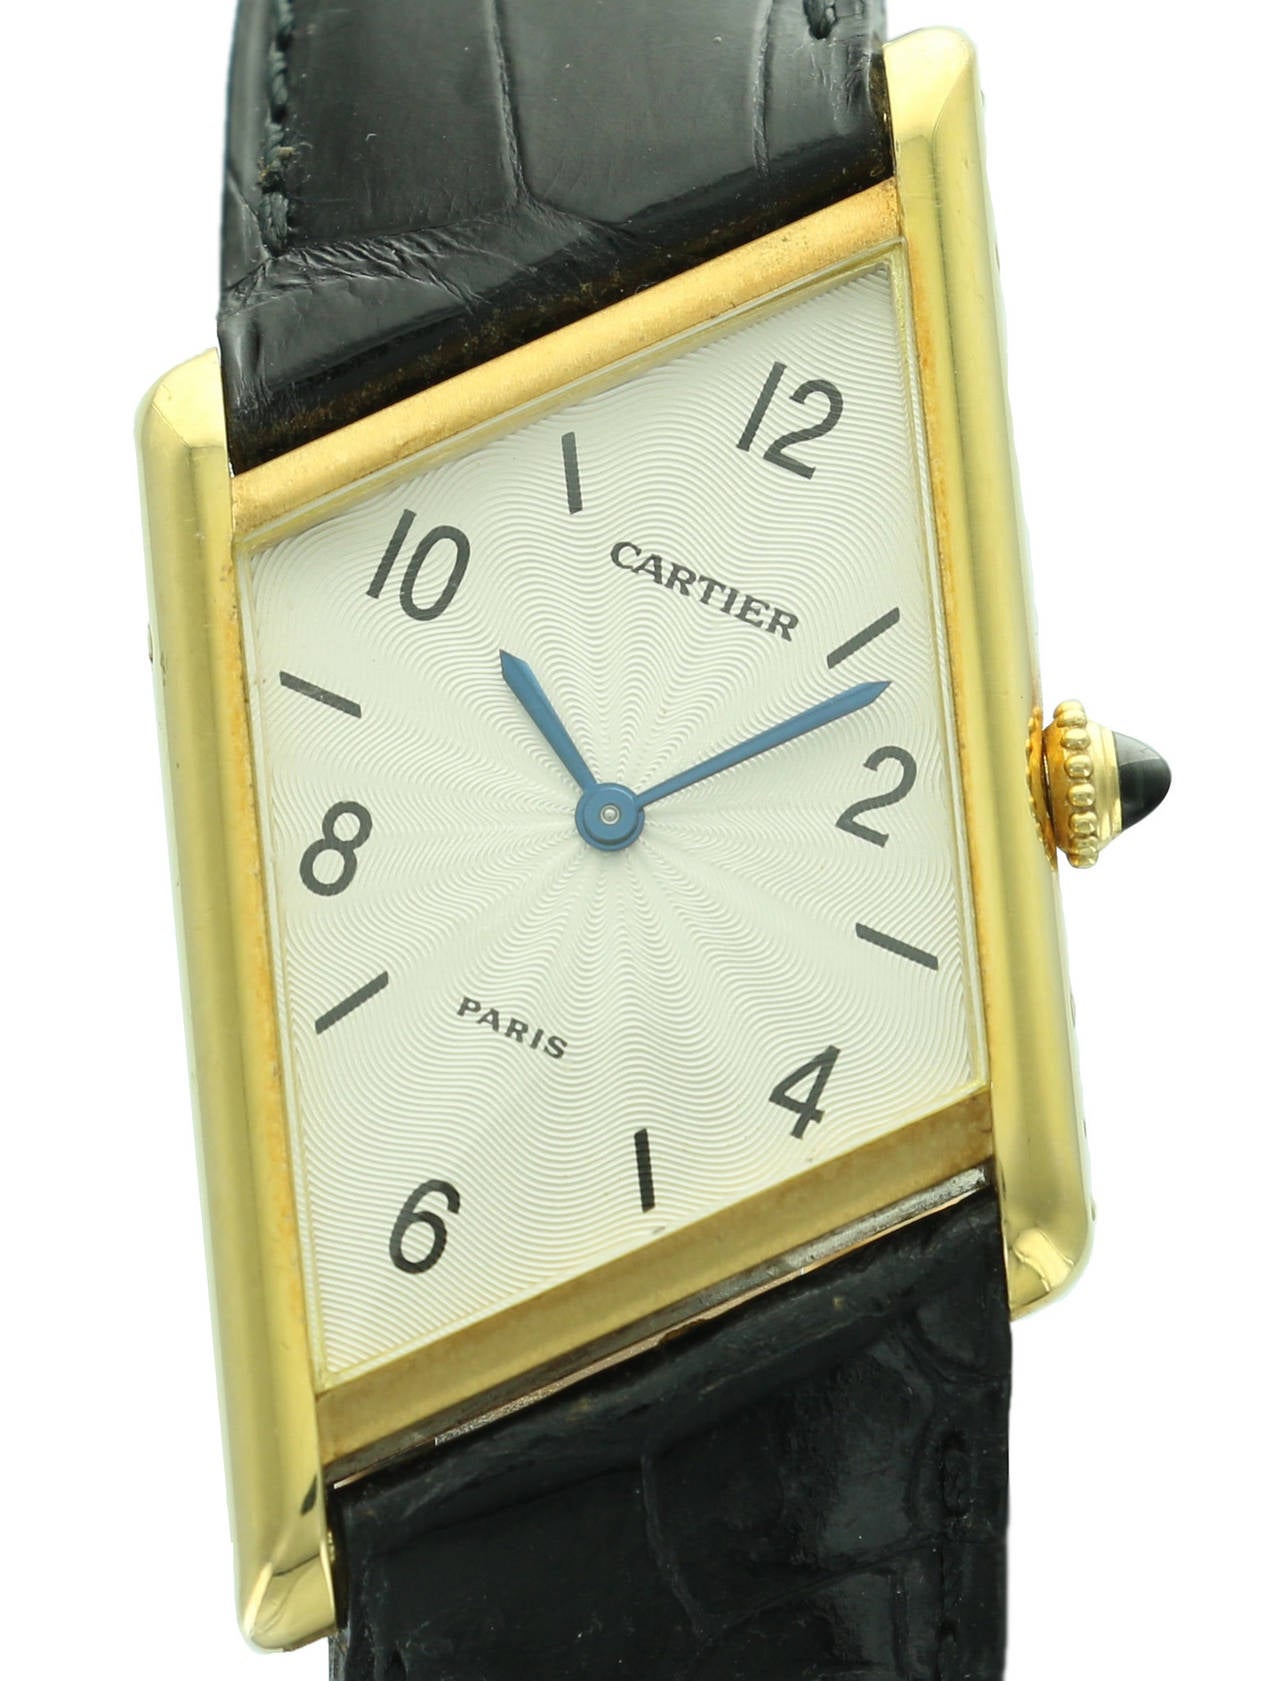 Cartier only produced 300 of this rare and elegant watch. It is a nod to Cartier's classic Tank design, with a twist. In excellent condition, this beautiful, slim watch is both fun and sophisticated at the same time.